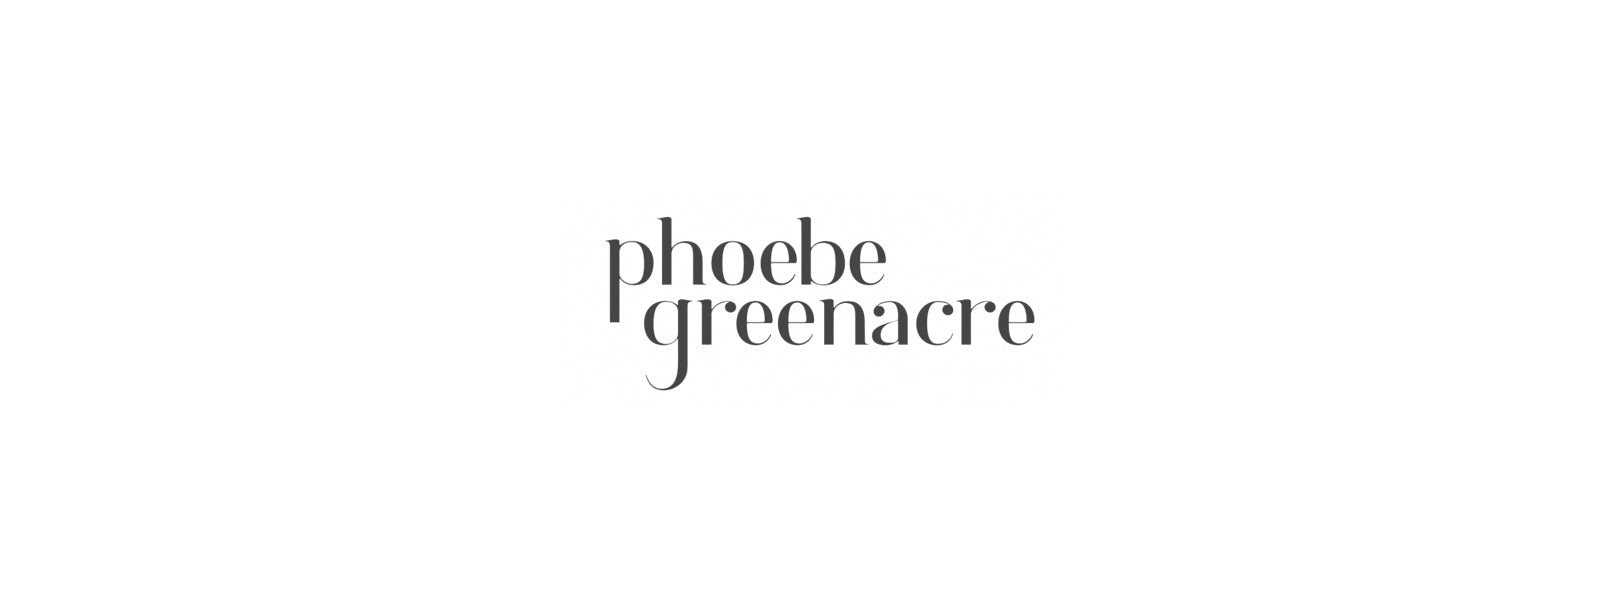 Consciously Alive with Phoebe Greenacre: Episode 24 with Theme Rains